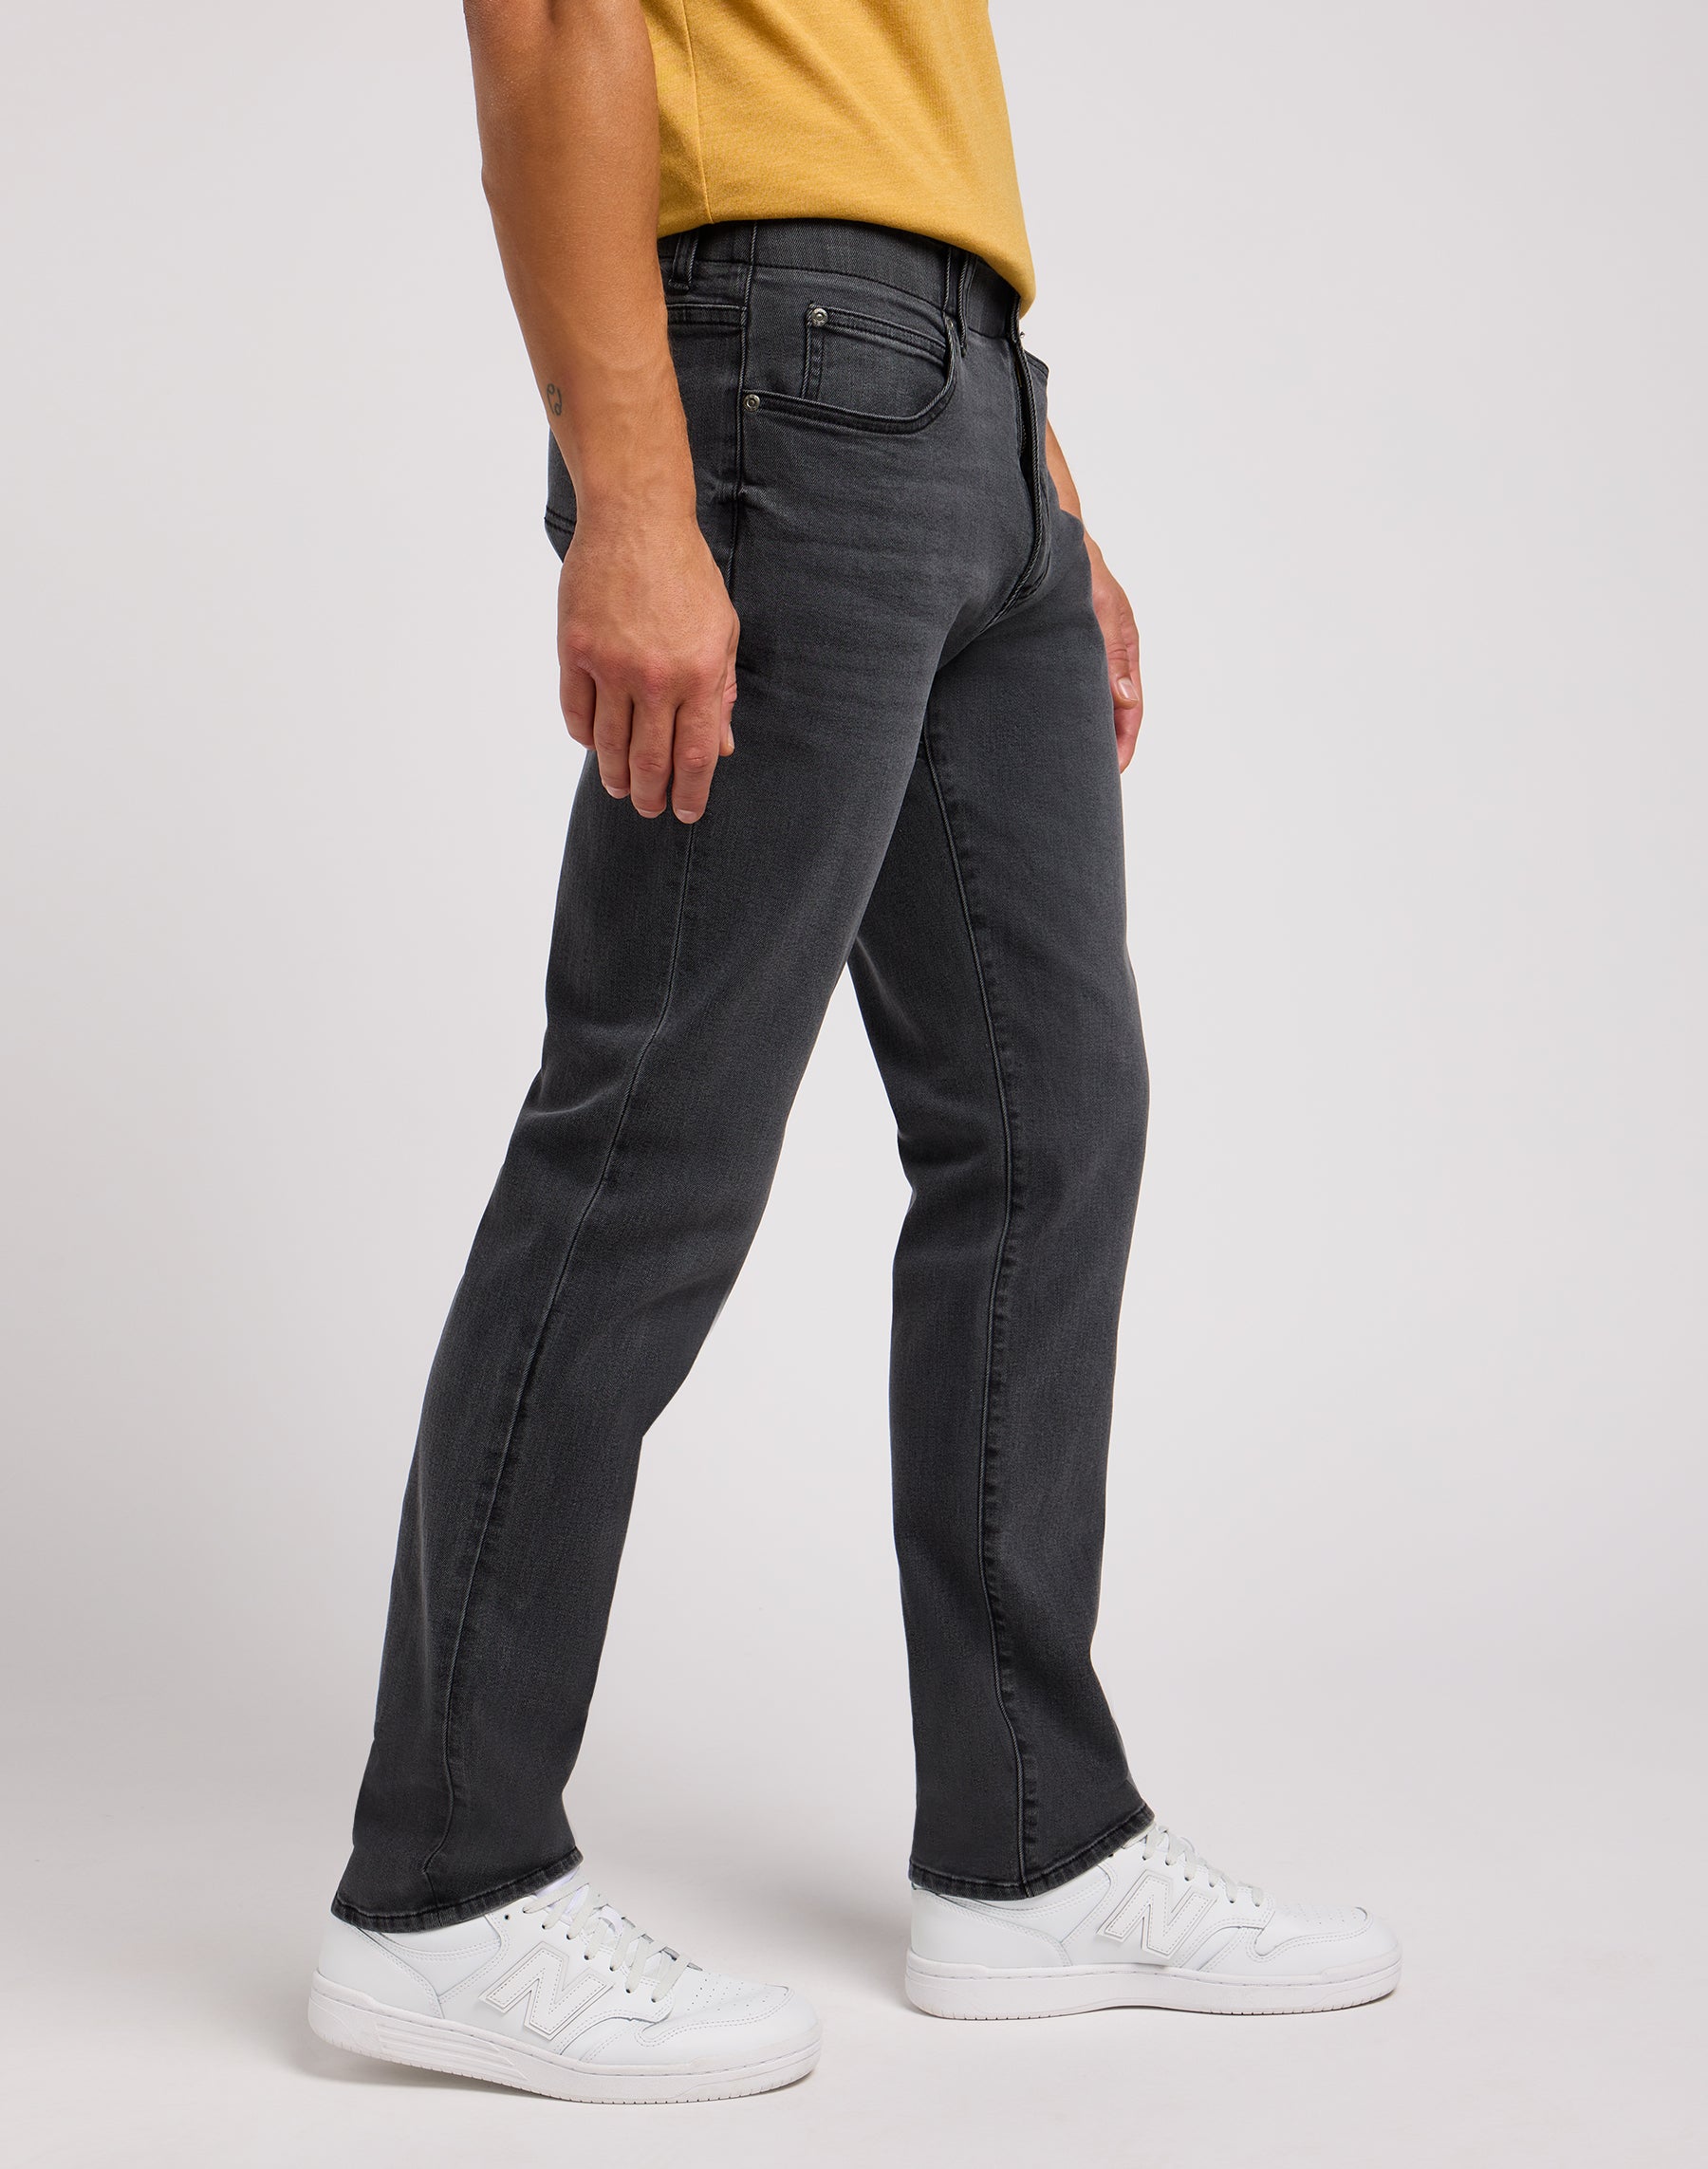 Straight Fit MVP in Copper Falls Jeans Lee   